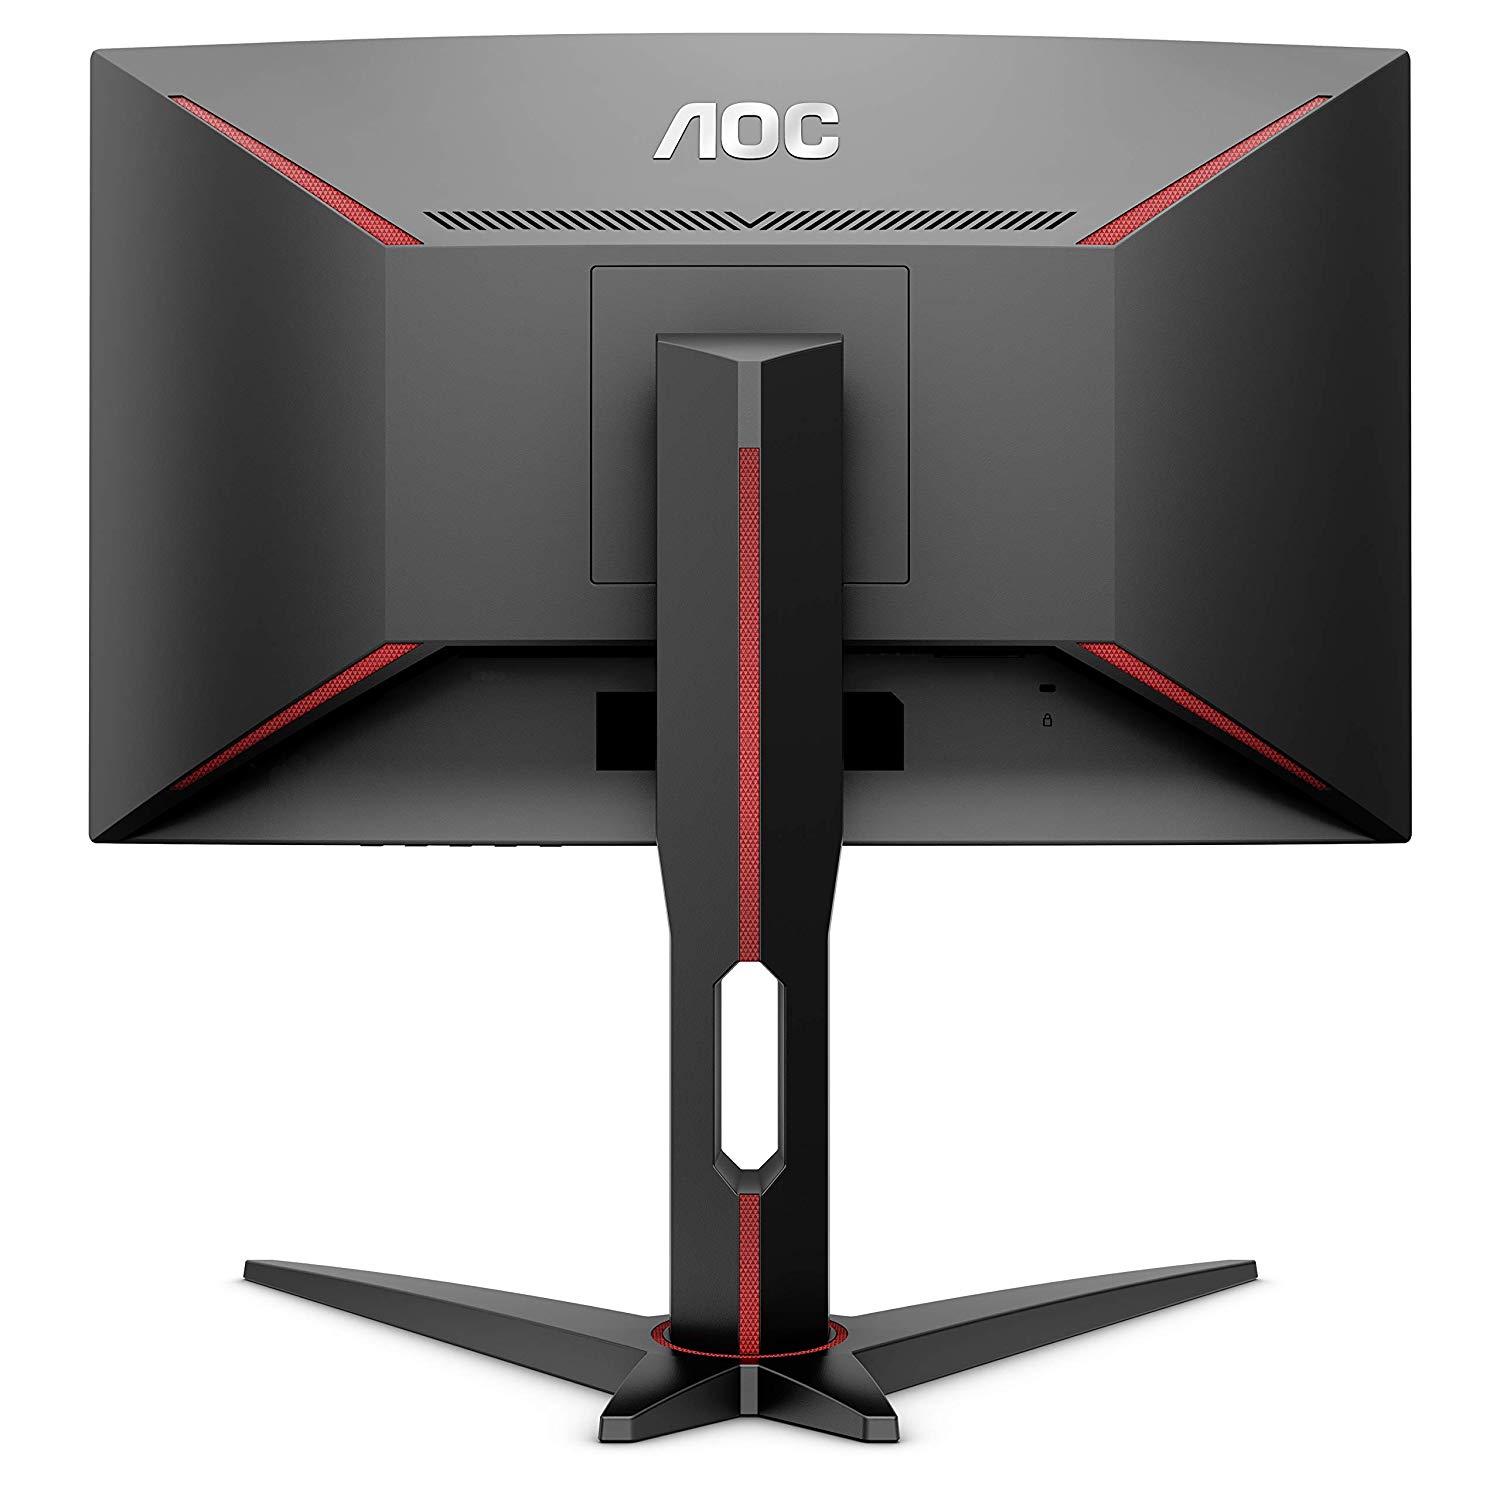 Meet The AOC CQ27G1, The Newest Addition To The AOC CQ Line Of Gaming Monitors, And It’s A Good Deal For Gamers On A Budget